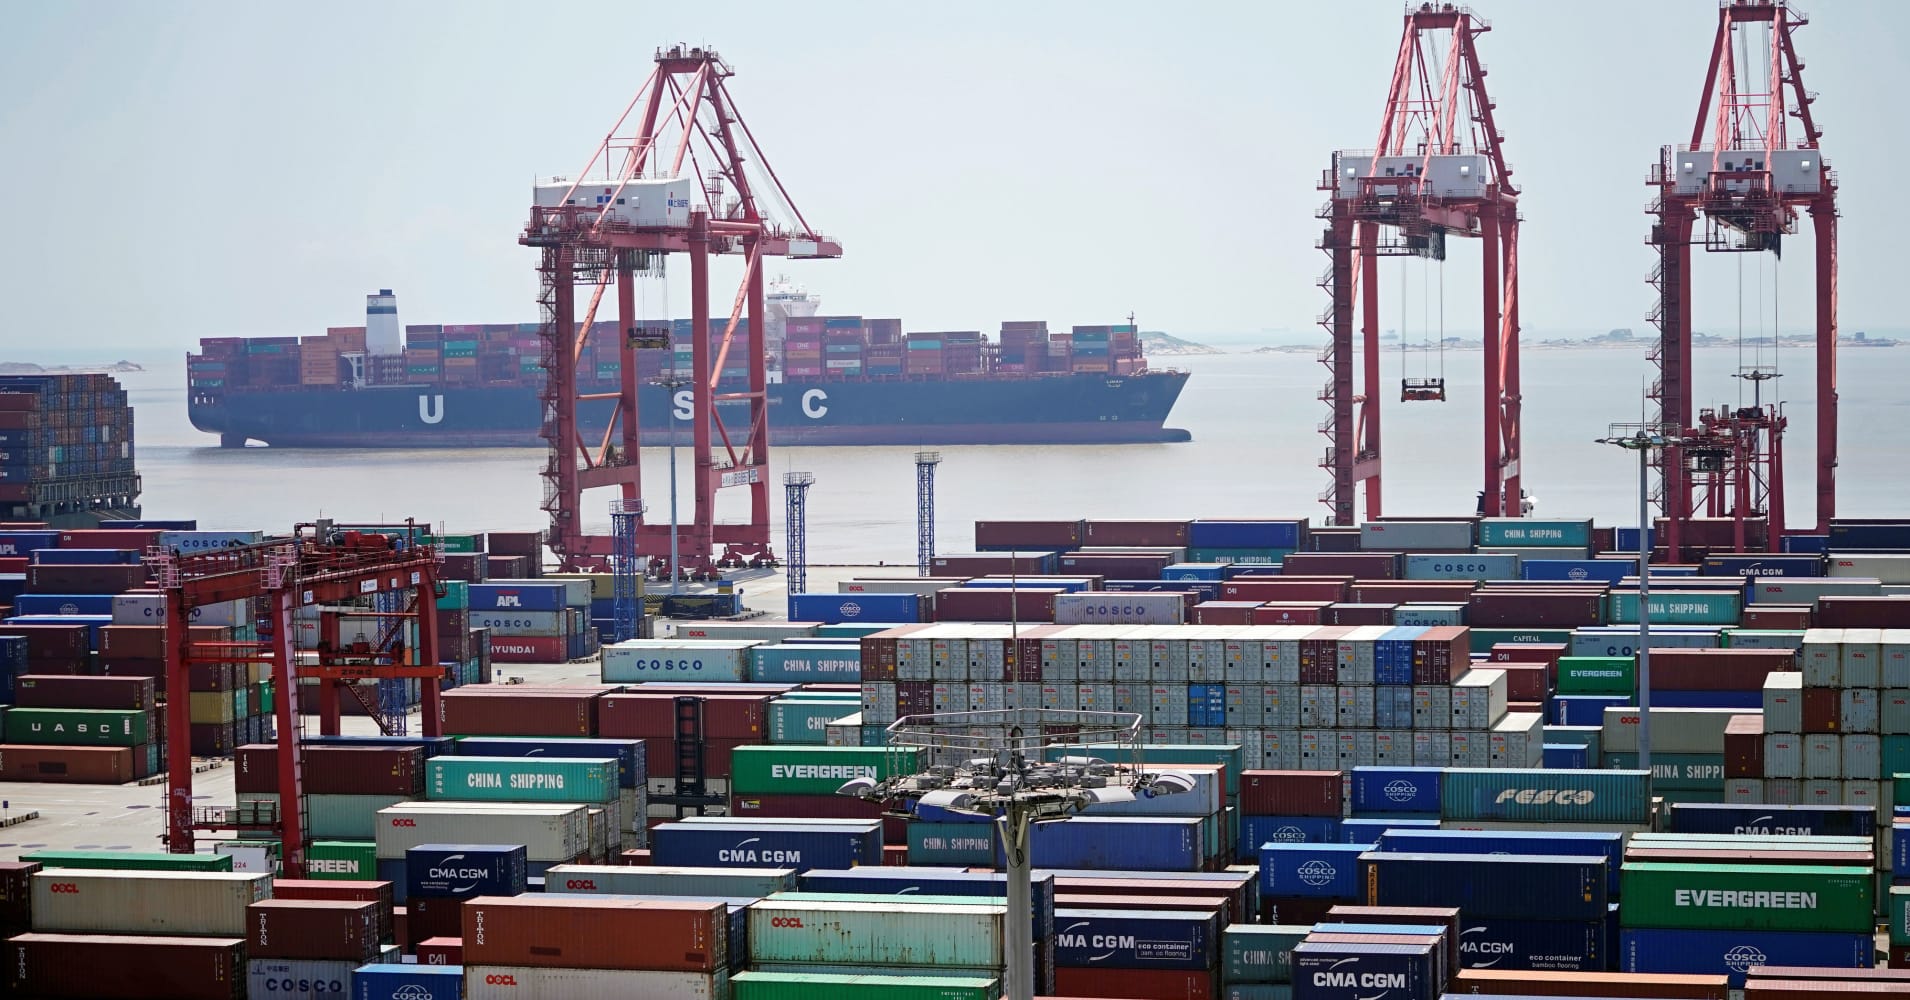 china's imports jump 8.4% in april, exceeding expectations as purchases from the u.s. grow